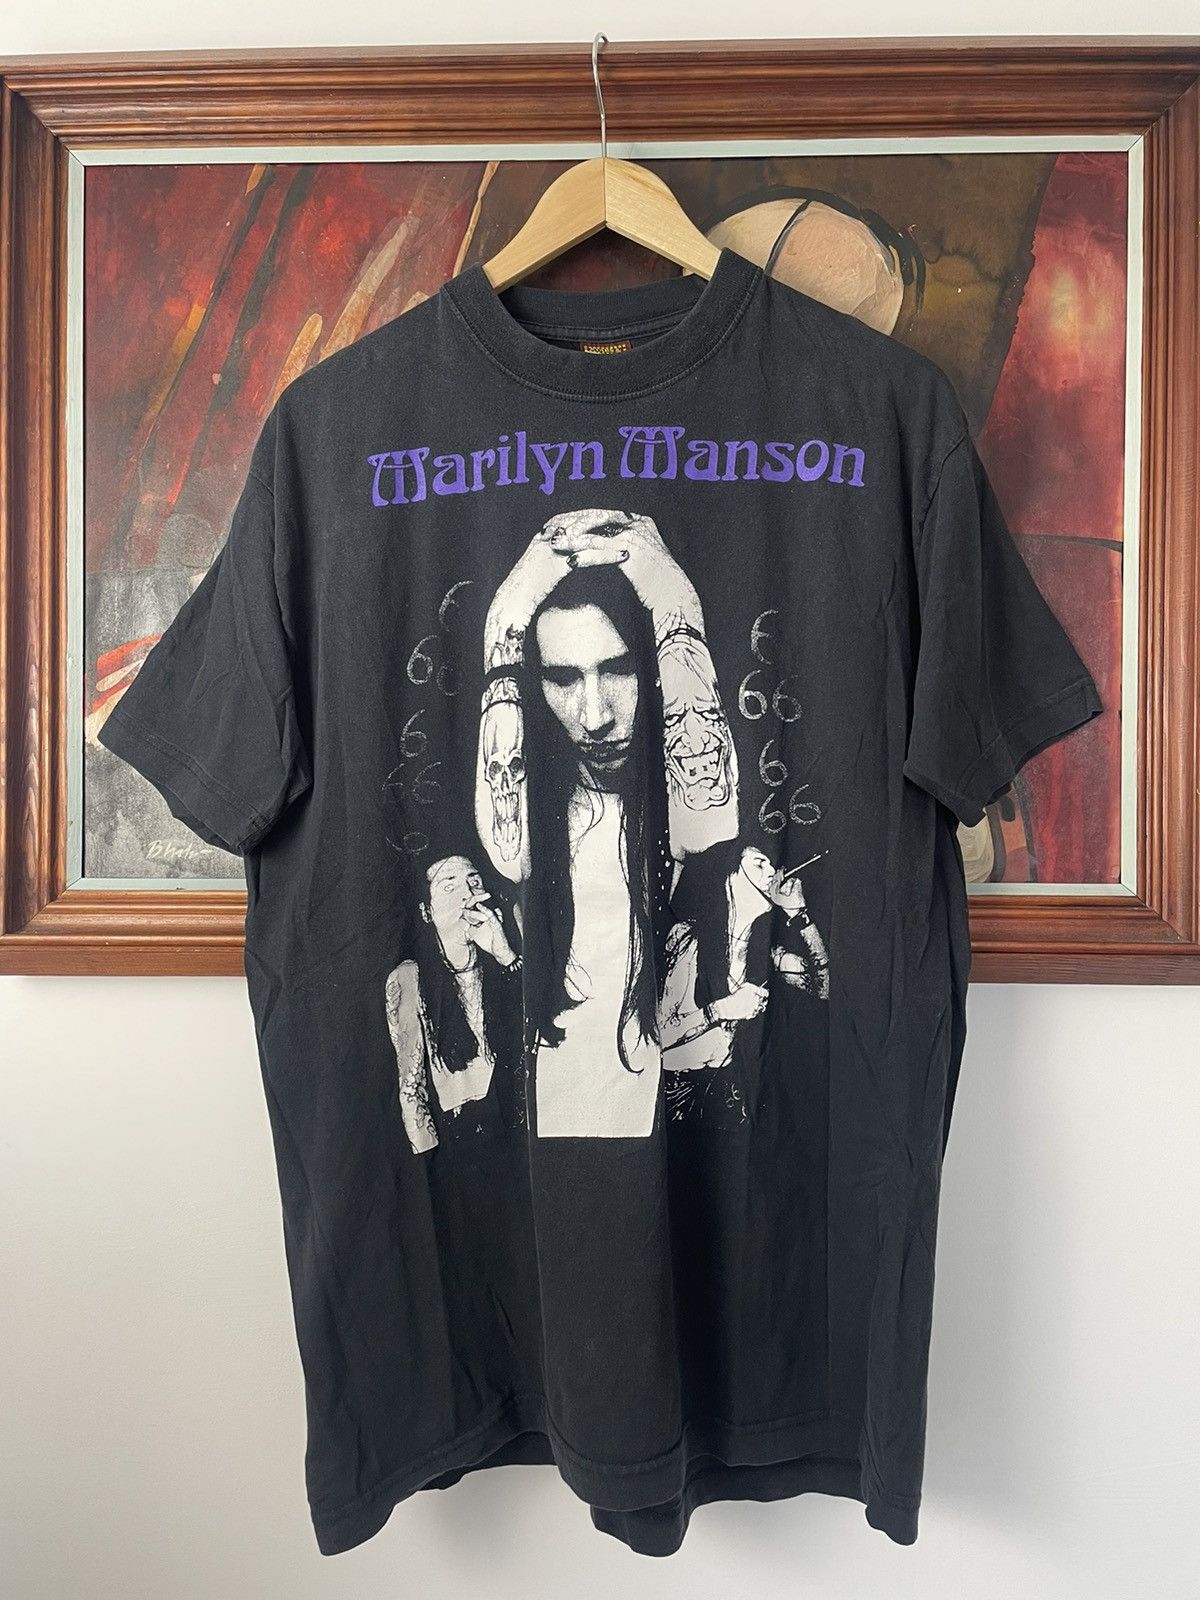 Pre-owned Band Tees X Marilyn Manson Vintage 90's Washed Black Band Rock Tee